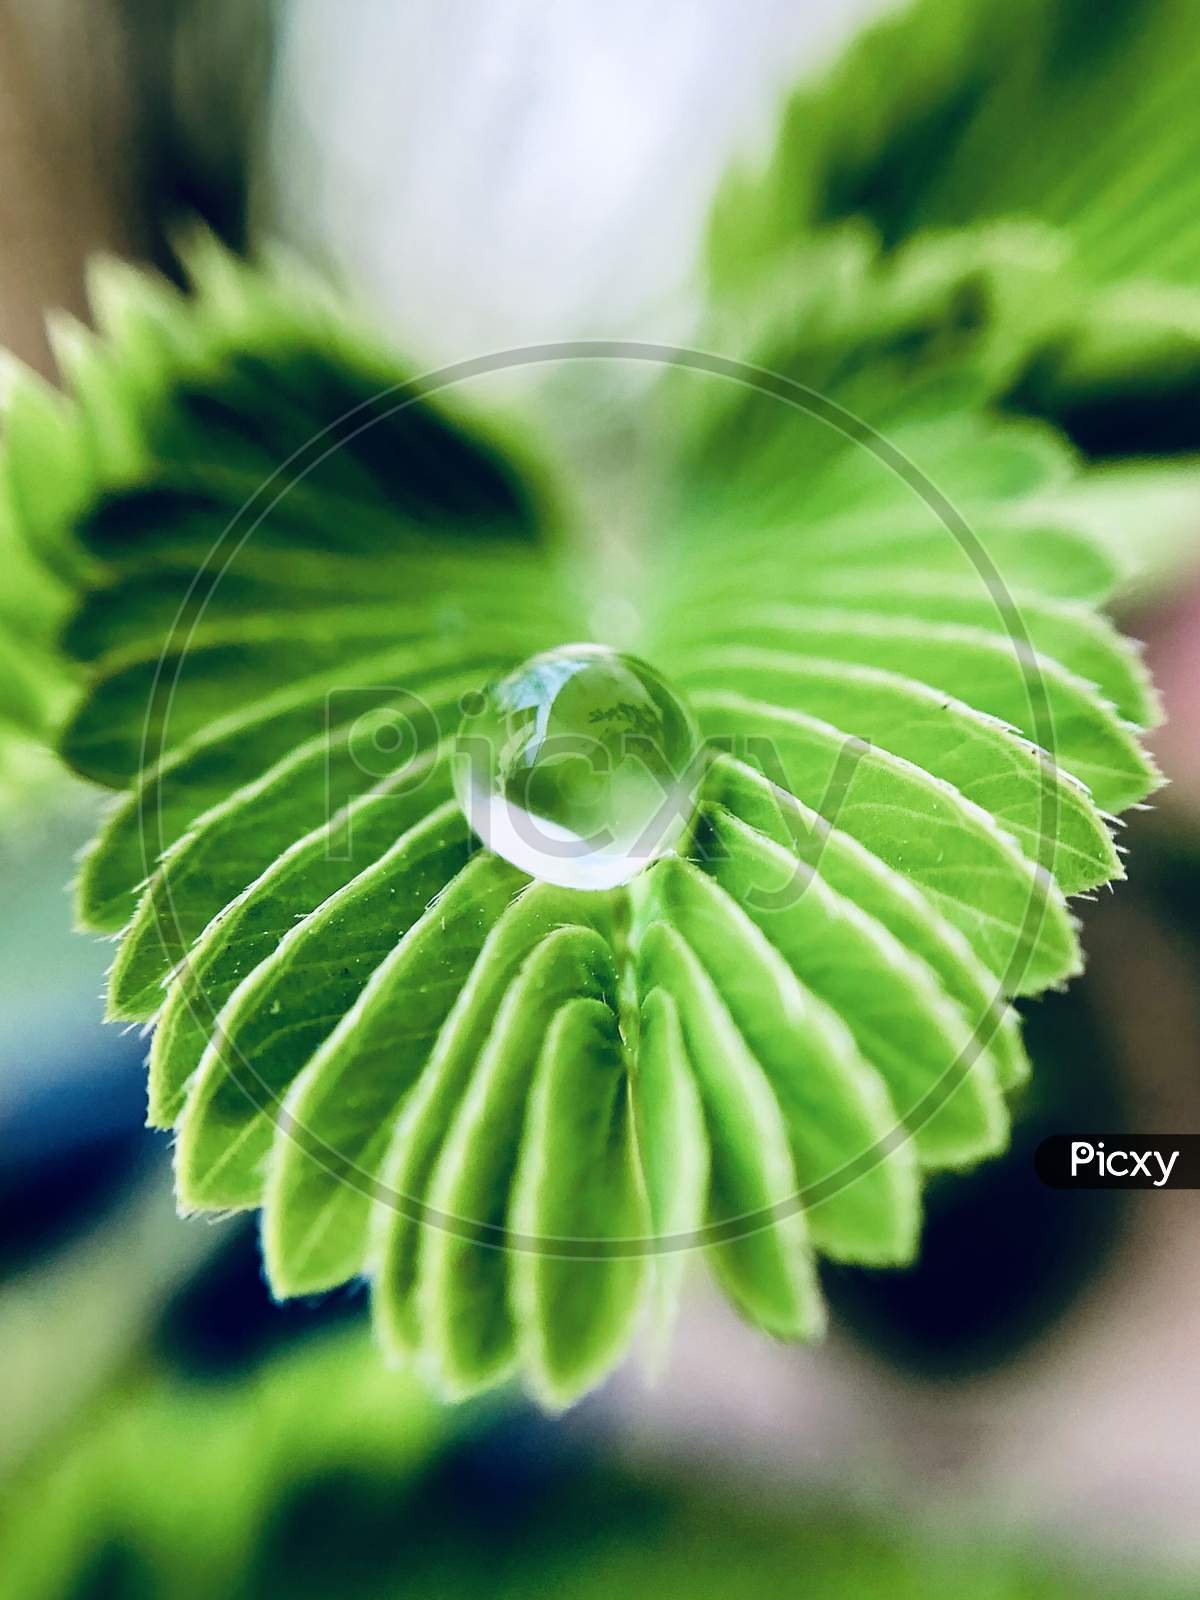 Mimosa Pudica Touch me not plant with water drop art wallpaper nature green macro image